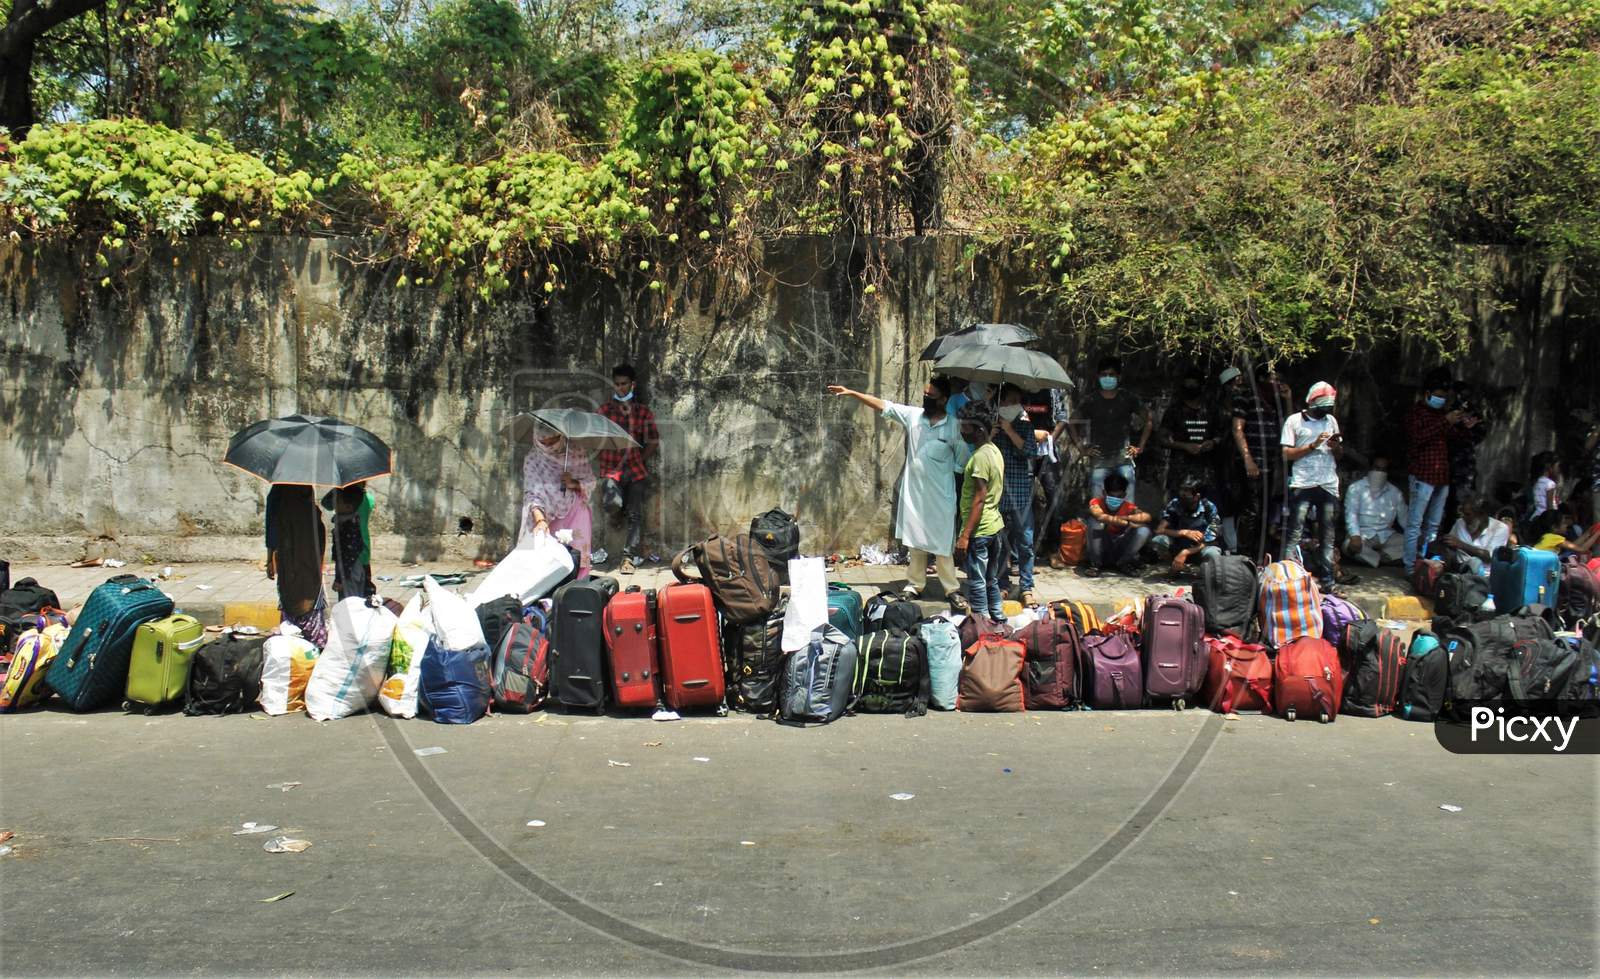 Bags are seen lined up as people wait outside Chhatrapati Shivaji Maharaj Terminus(CSMT) to board a train that will take them to their home state during an extended lockdown to slow the spreading of the coronavirus disease (COVID-19), in Mumbai, India on May 27, 2020.